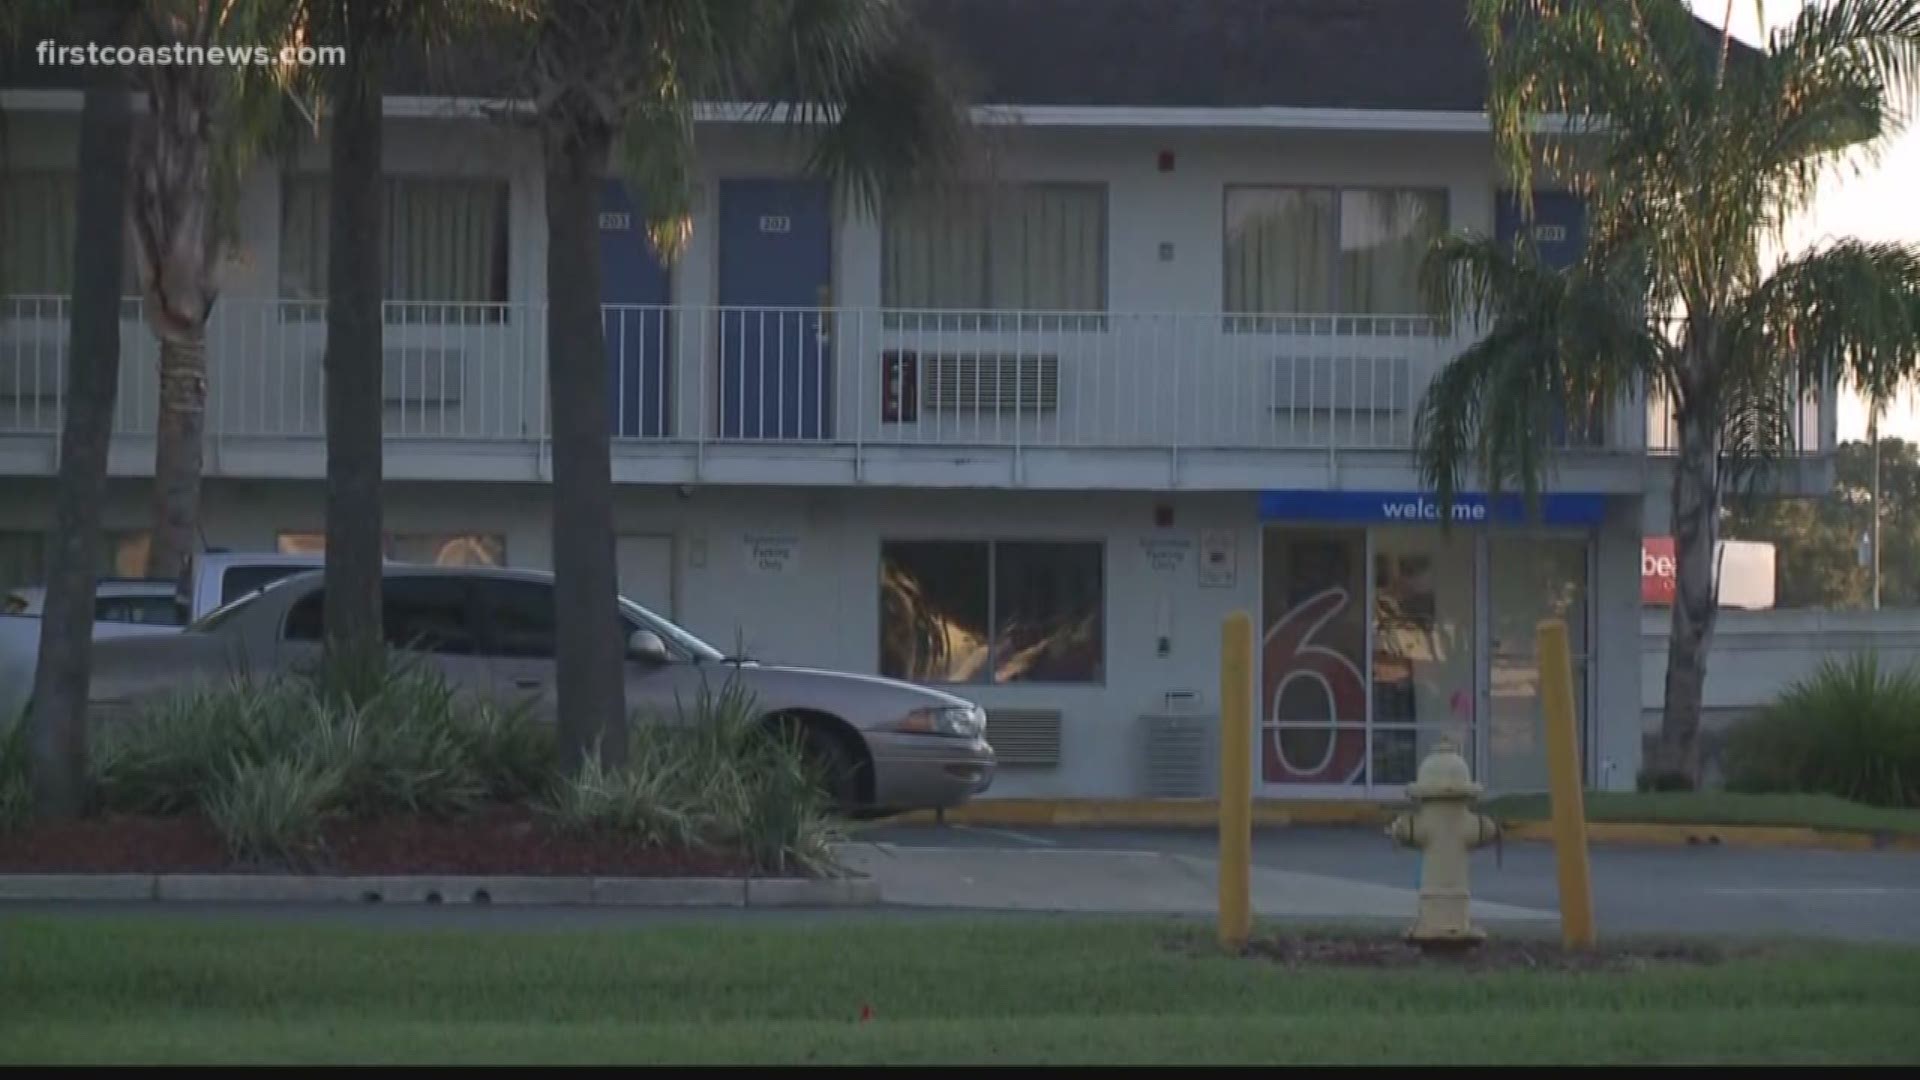 A woman in her mid-20s was shot at a motel in Argyle Forest overnight Friday, the Jacksonville Sheriff's Office said.